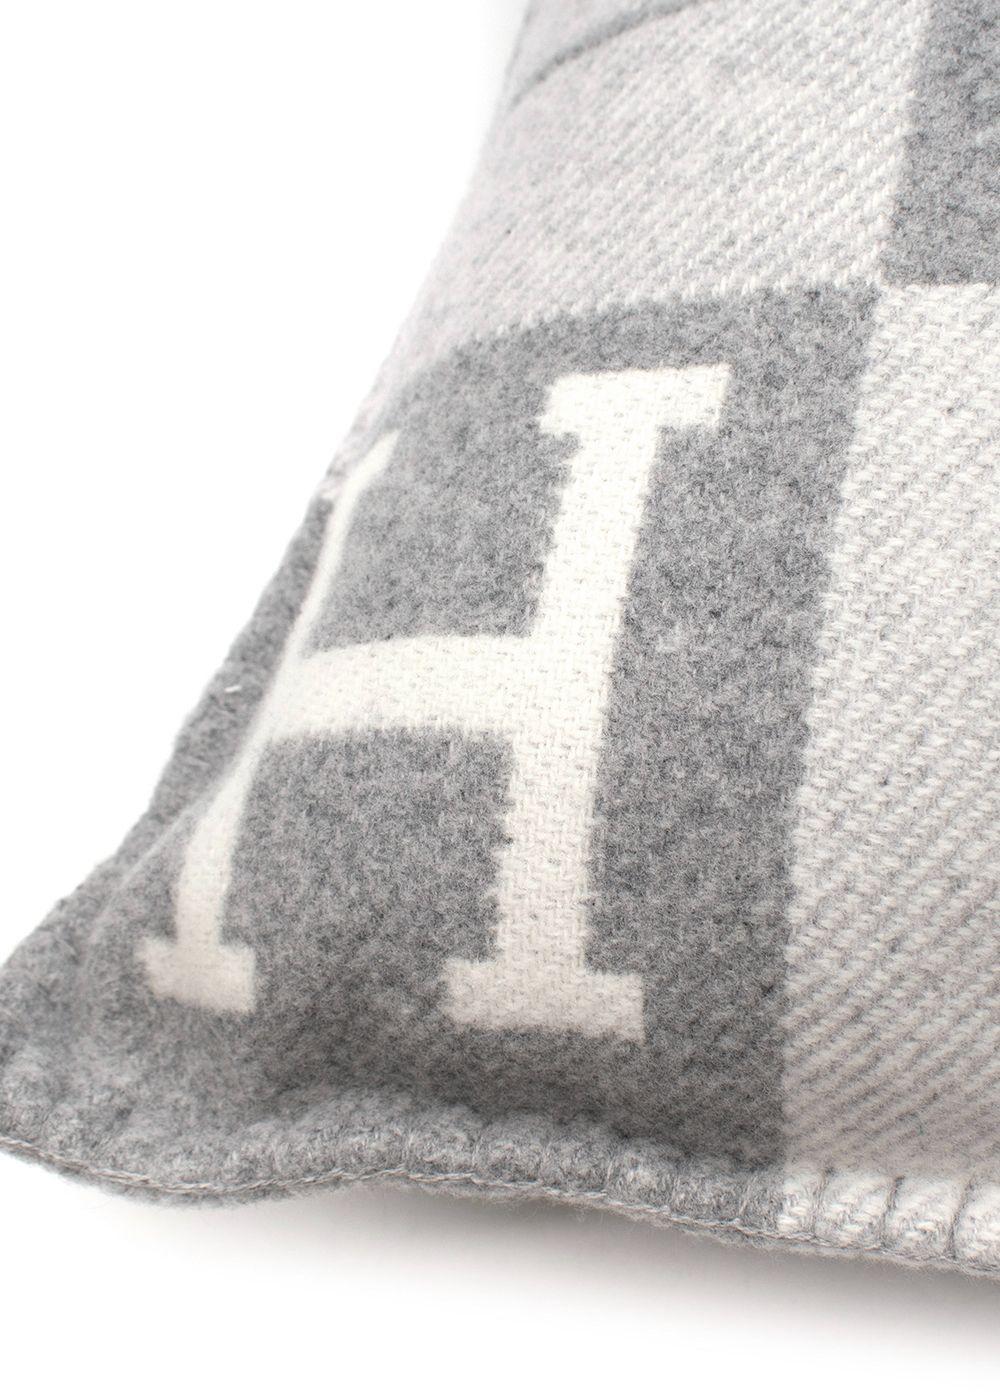 Hermes Ecru & Gris Clair Cashmere-Blend Avalon Pillow Small Model

- Small model of the iconic Avalon pillow featuring a geometric tone-on-tone pattern, with house H in each order
- Blanket stitched edge


Materials 
90% Wool 
10% Cashmere 

Made in